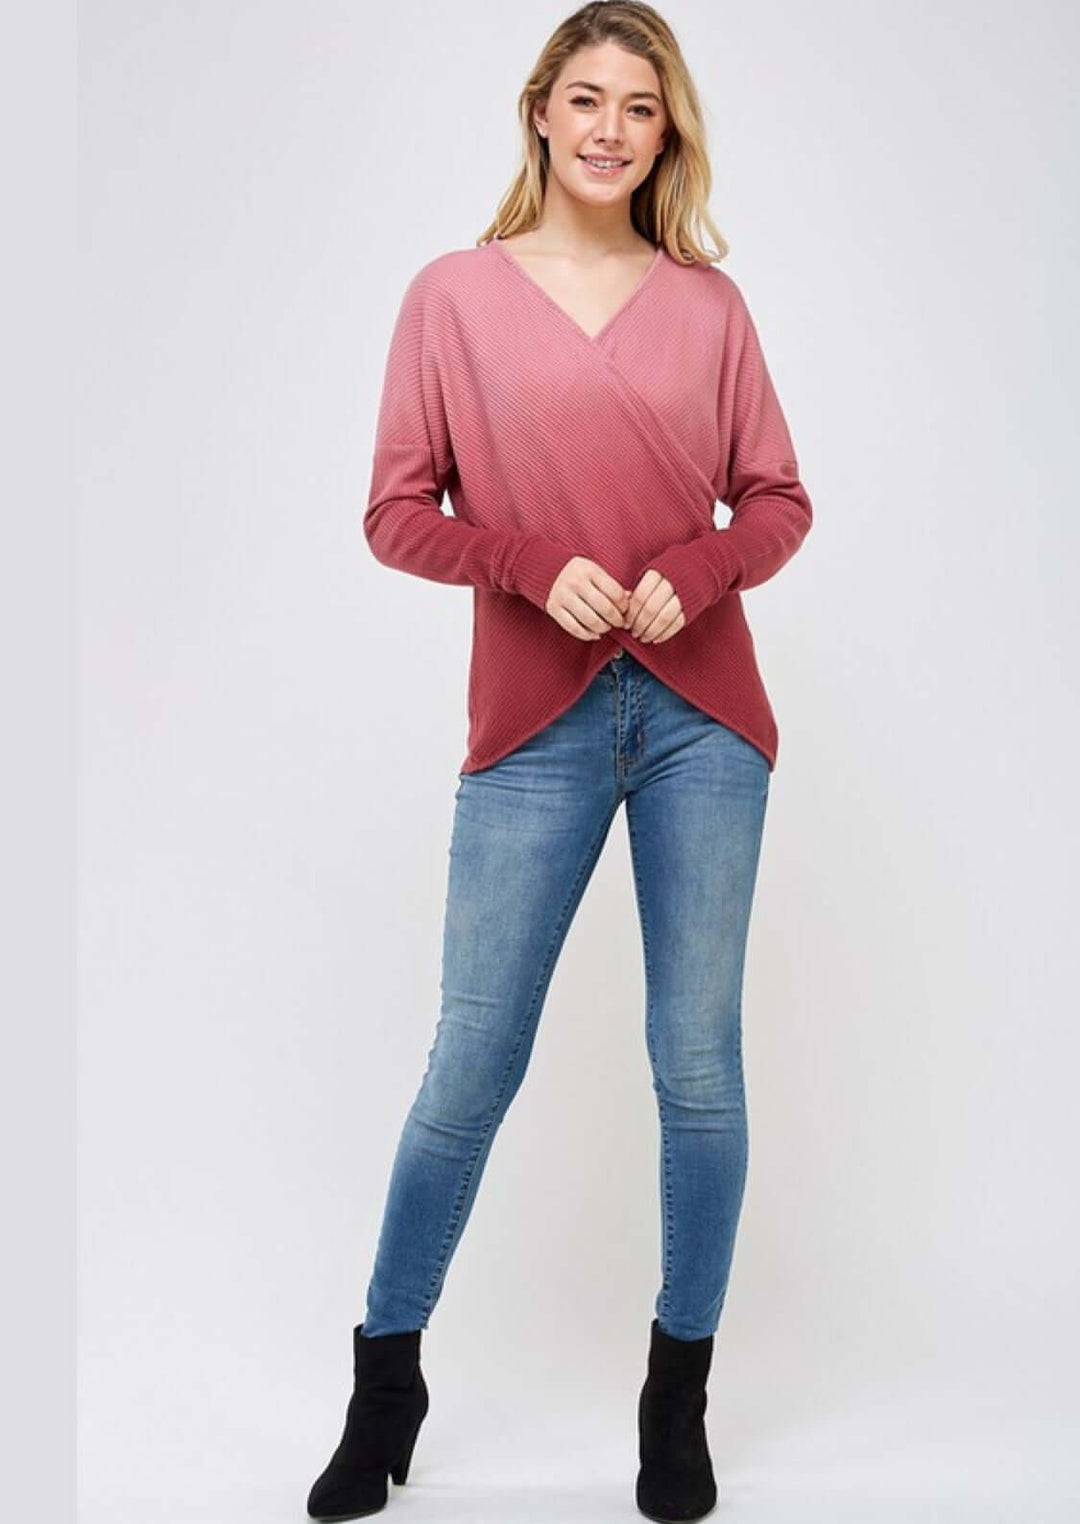 American Able Style# 118171 Ladies Overlap Burgundy Ombre Cotton Sweater Top Made in USA | Classy Cozy Cool Women's Made in America Clothing Boutique